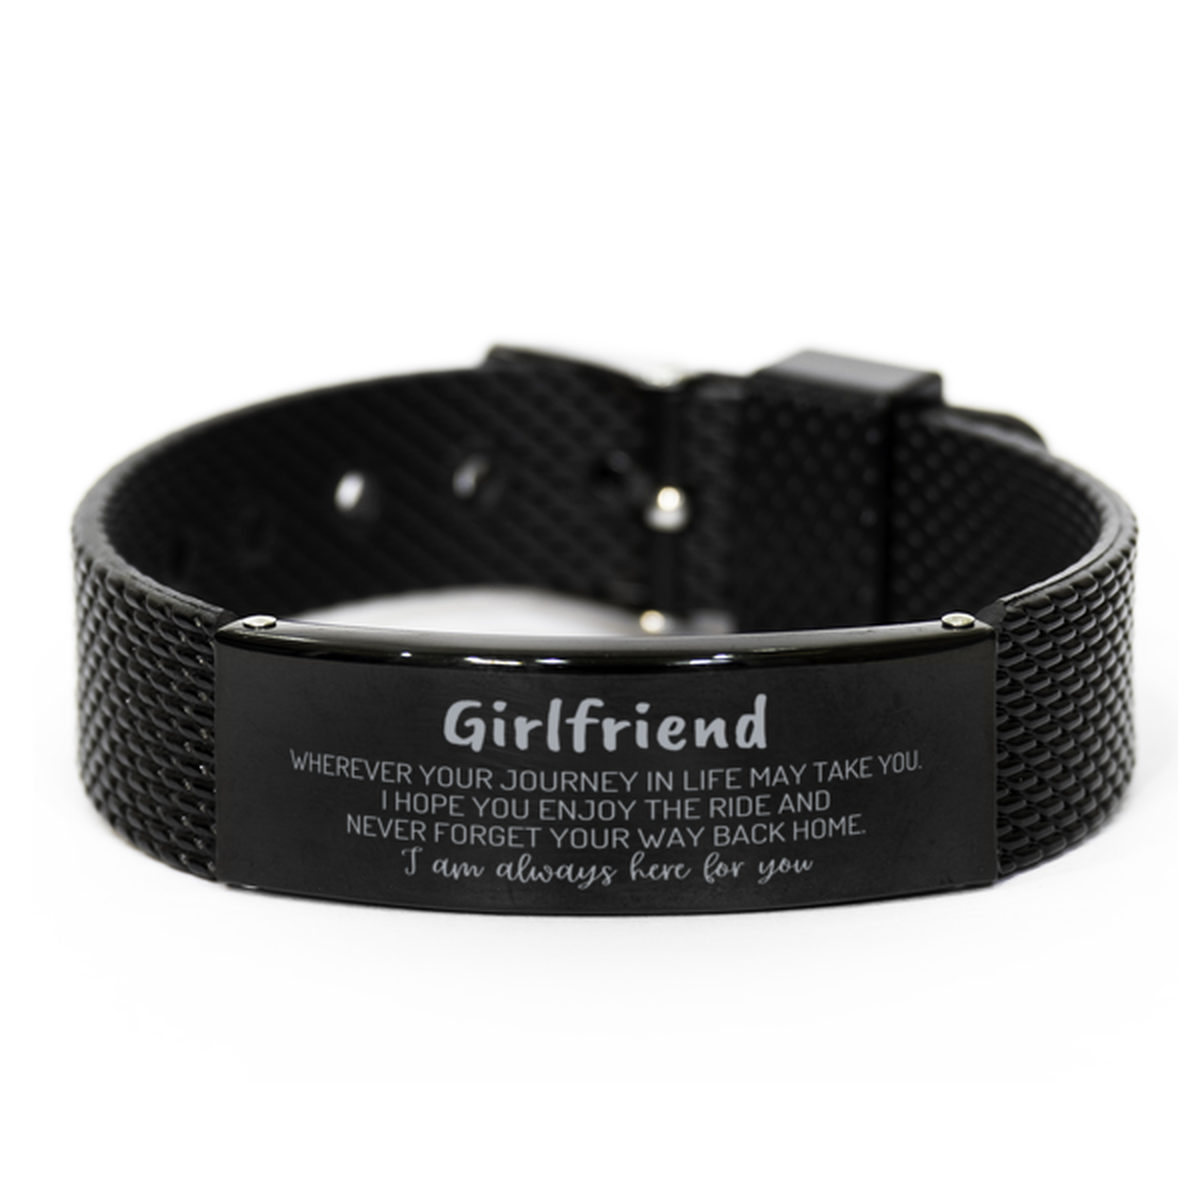 Girlfriend wherever your journey in life may take you, I am always here for you Girlfriend Black Shark Mesh Bracelet, Awesome Christmas Gifts For Girlfriend, Girlfriend Birthday Gifts for Men Women Family Loved One